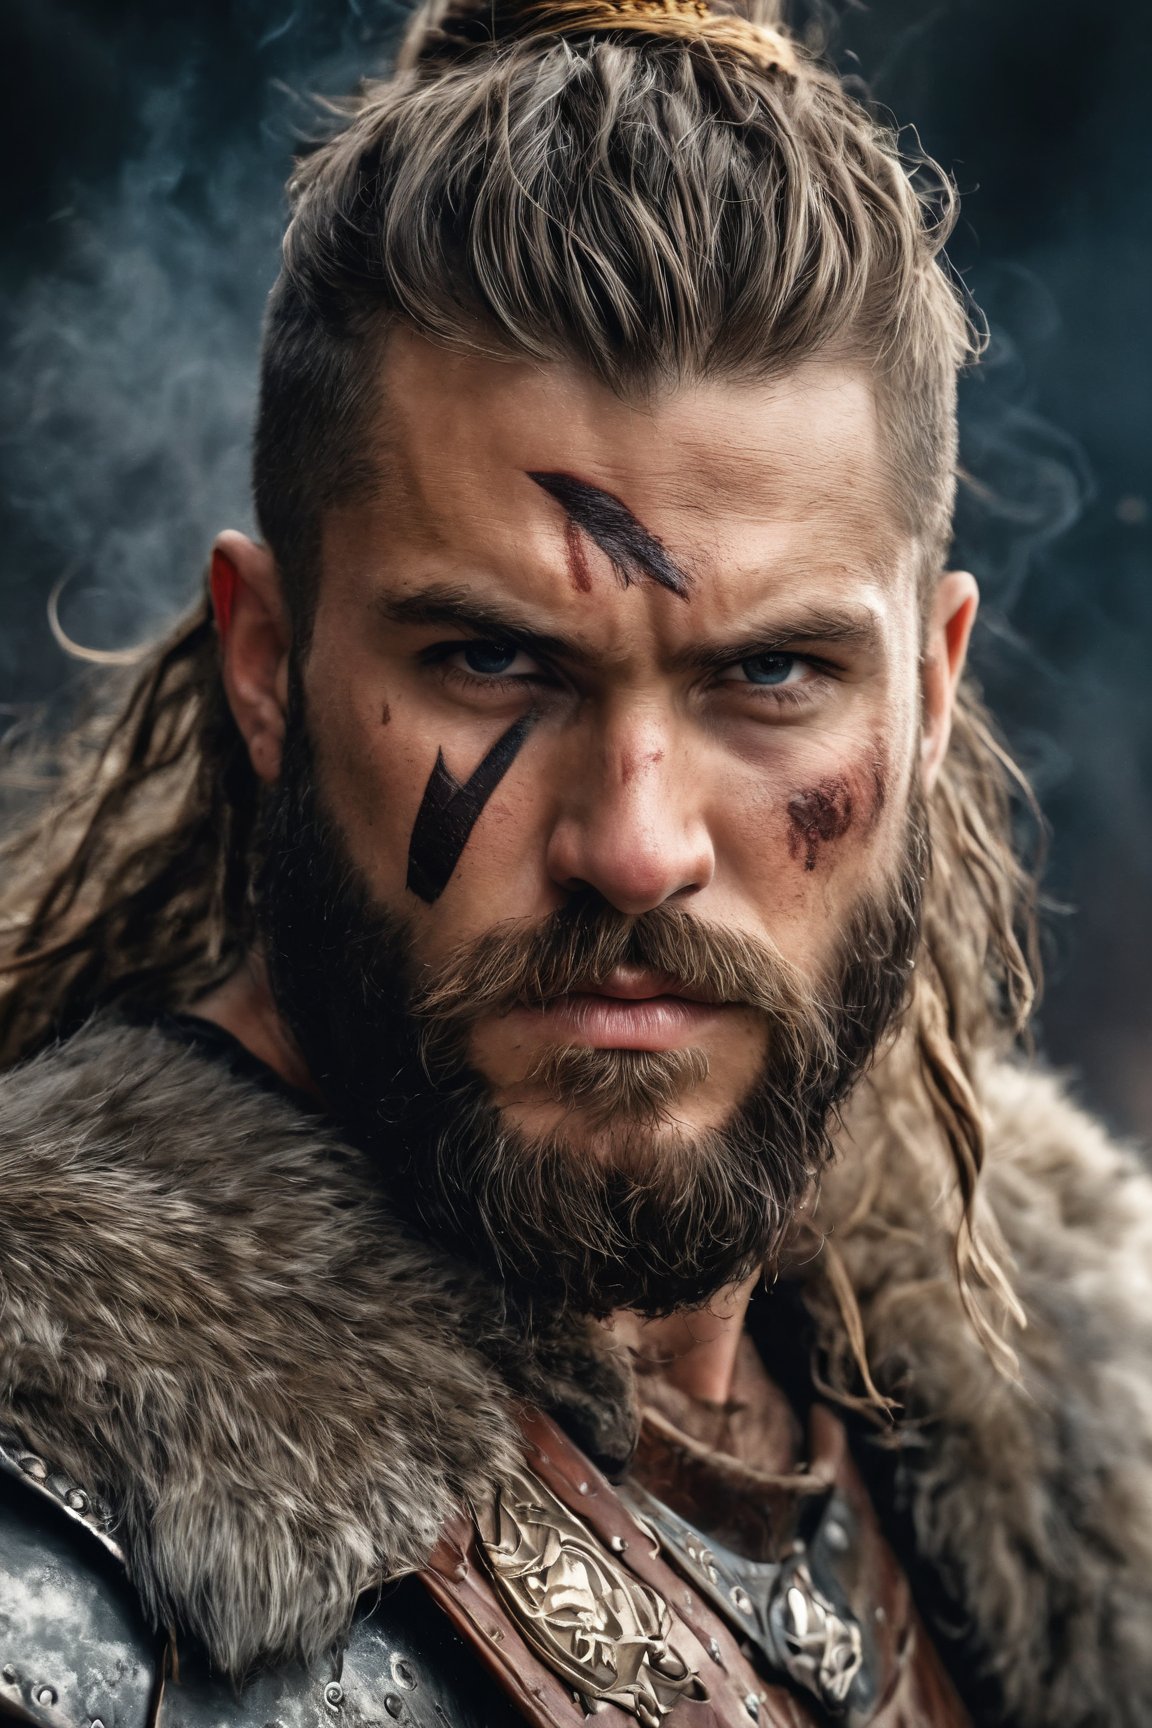 portrait,  viking warrior,  man,  warrior face paintings and blood,  detailed eyes,  shallow depth of field,  vignette,  highly detailed,  high budget Hollywood film,  (best quality,  4k,  8k,  highres,  masterpiece:1.2),  ultra-detailed,  (realistic,  photorealistic,  photo-realistic:1.37),  HDR,  UHD,  studio lighting,  ultra-fine painting,  sharp focus,  physically-based rendering,  extreme detail description,  professional,  vivid colors,  bokeh,  portraits,  war paint,  fierce expression,  metal armor,  weathered look,  bearded,  strong physique,  intense gaze,  androgynous,  scar on face,  battle scars,  broad shoulders,  ornate helmet,  ancient runes,  beads in hair,  smoke in background,  sword in hand,  shield,  stoic expression,  wind-swept hair,  roaring warrior,  muscular build,  heroic stance,  foreboding atmosphere,  dramatic lighting,  gritty texture,  contrasting shadows,  fire in the eyes,  tribal tattoos,  swirling mist,  ferocious demeanor,  commanding presence,  secrets in the eyes,  warrior symbol,  weathered background,  weather-beaten face